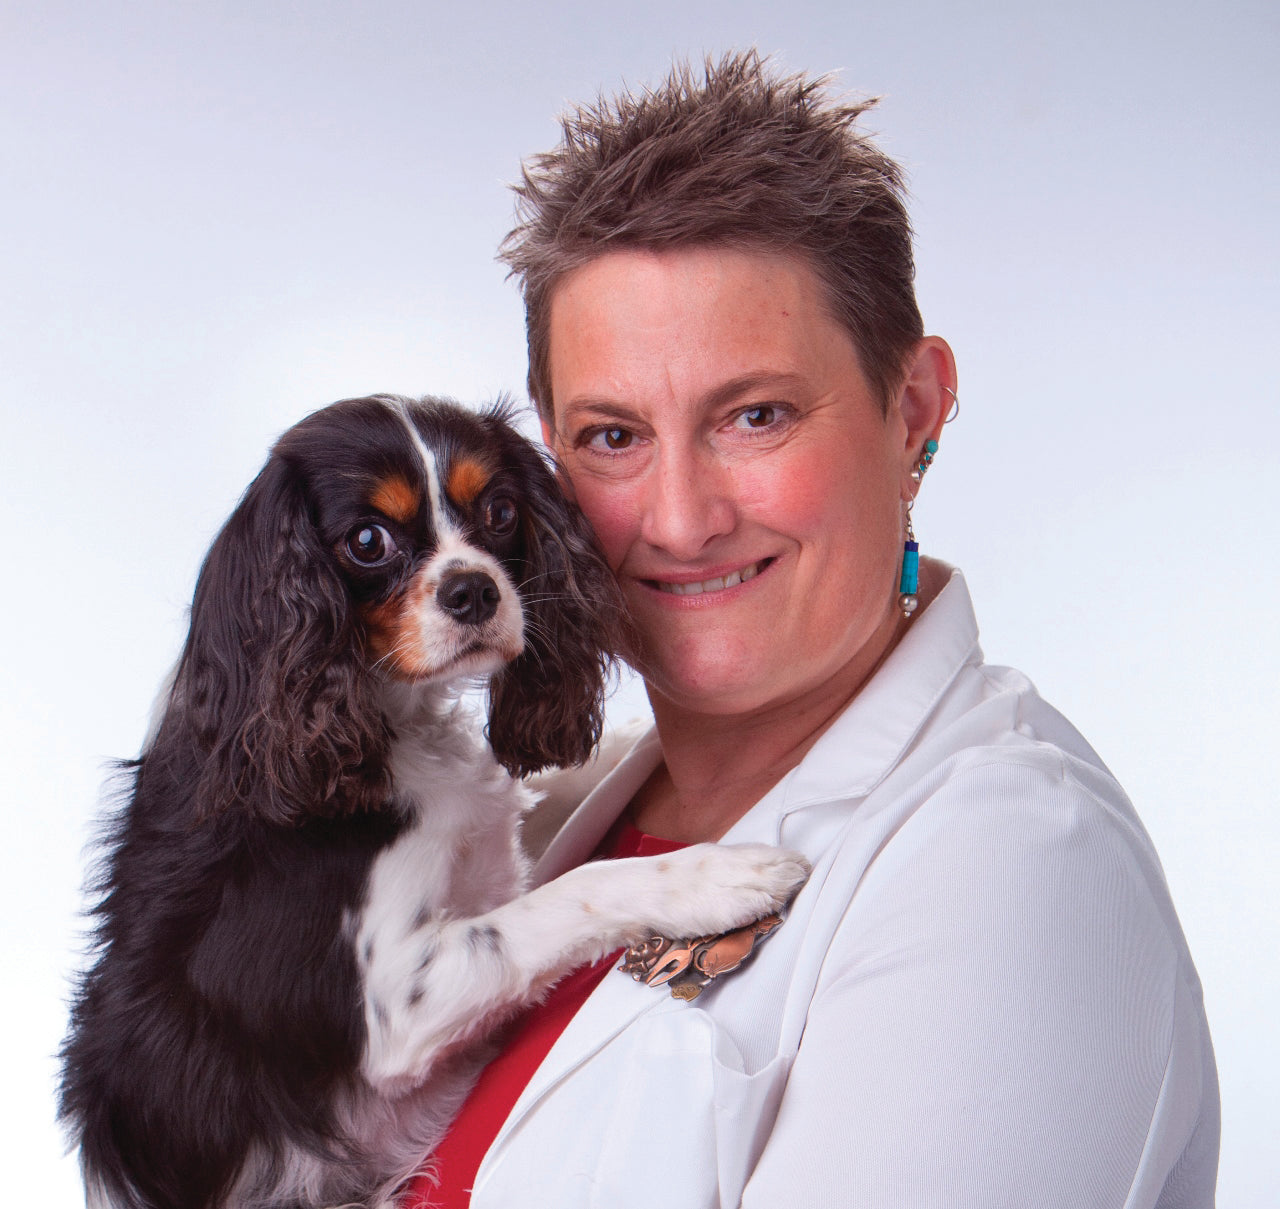 This image is of Dr. Robin Downing and a black, white and tan dog.